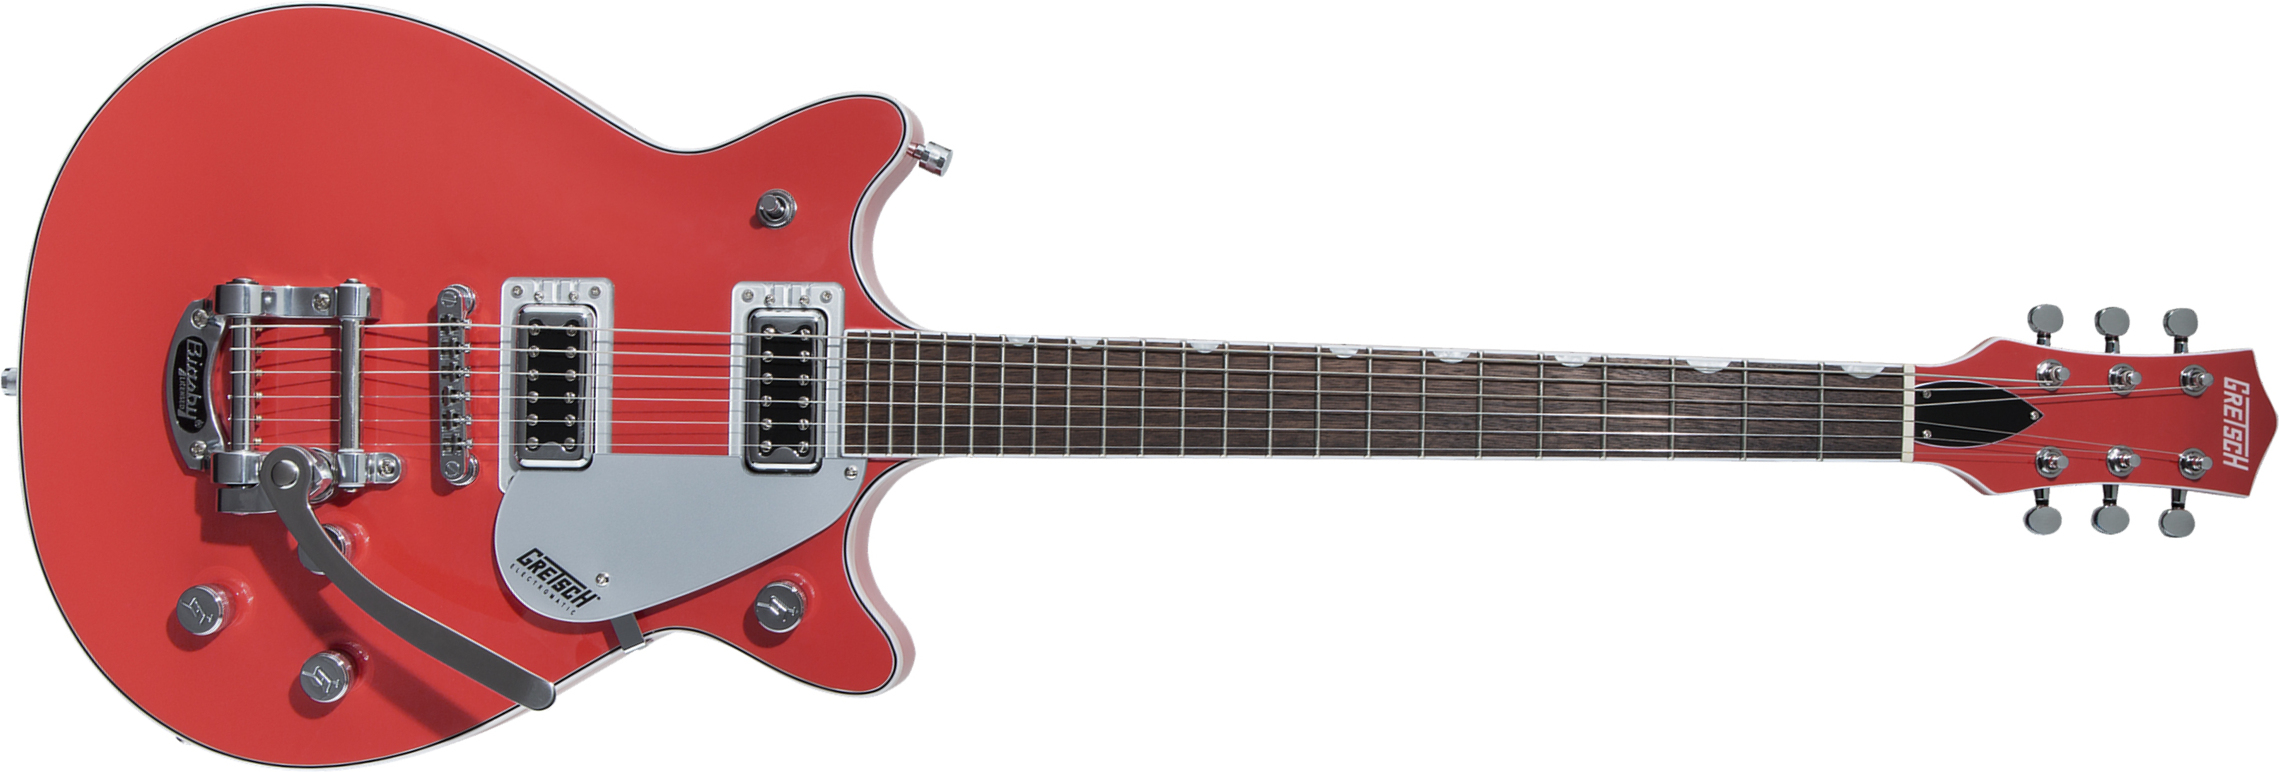 Gretsch G5232t Electromatic Double Jet Ft 2019 Hh Bigsby Lau - Tahiti Red - Double Cut E-Gitarre - Main picture